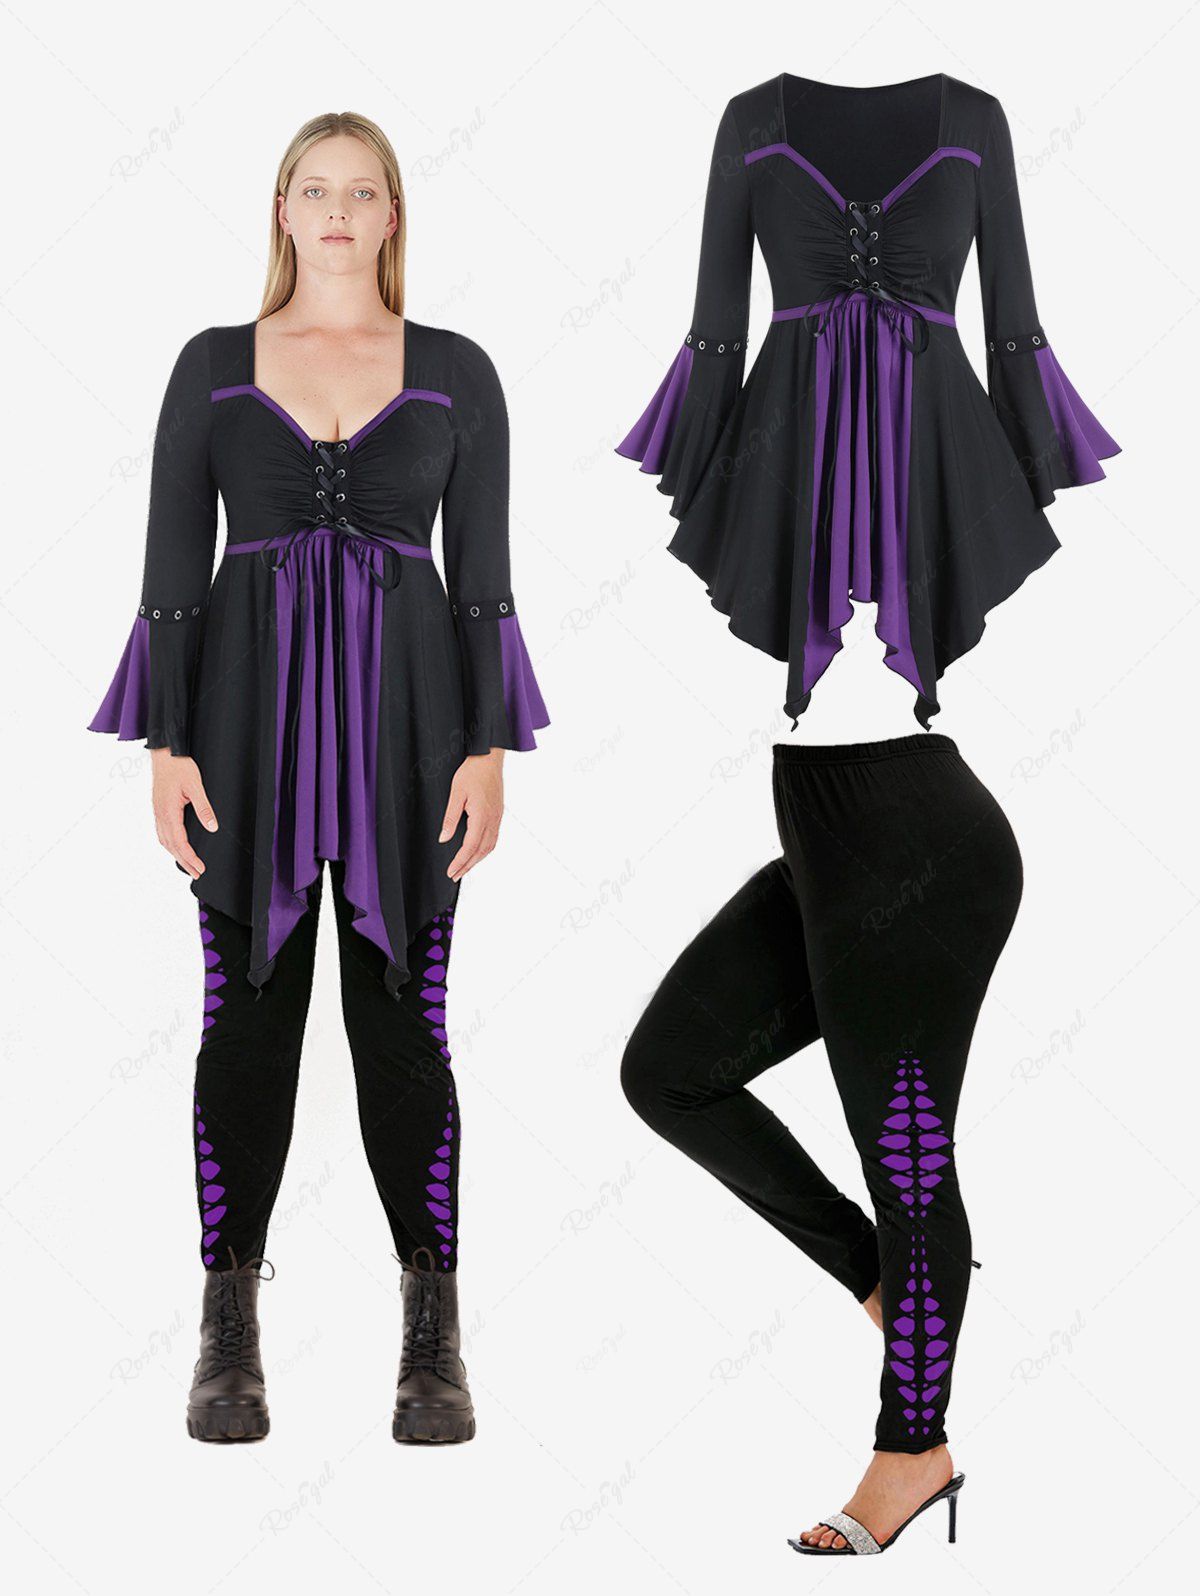 Online Flare Sleeves Lace Up Contrast Hanky Hem Tee and Gothic Skeleton Printed Leggings Outfit  